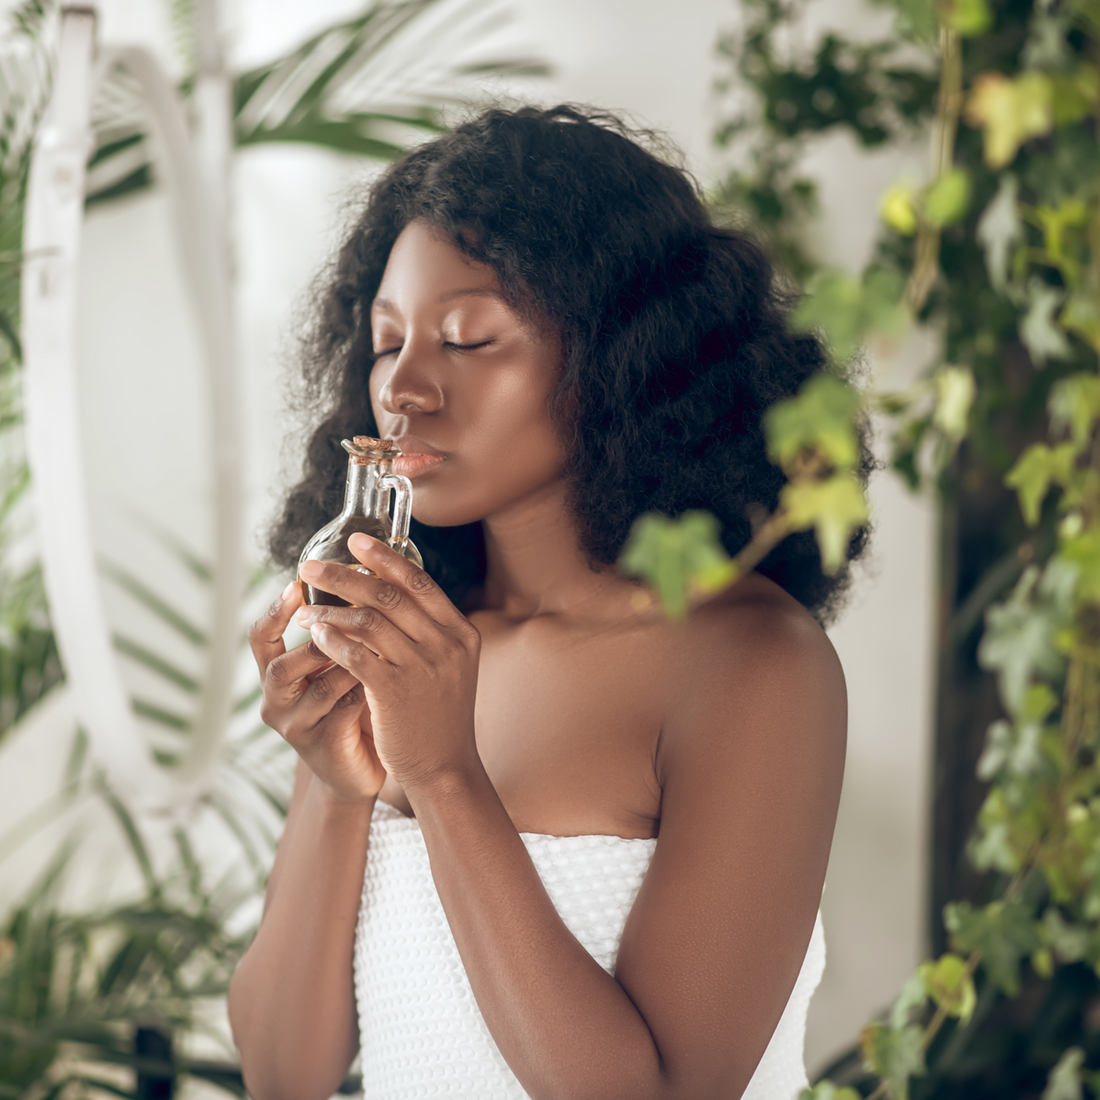 How Aromatherapy and Essential Oils Will Improve Your Life